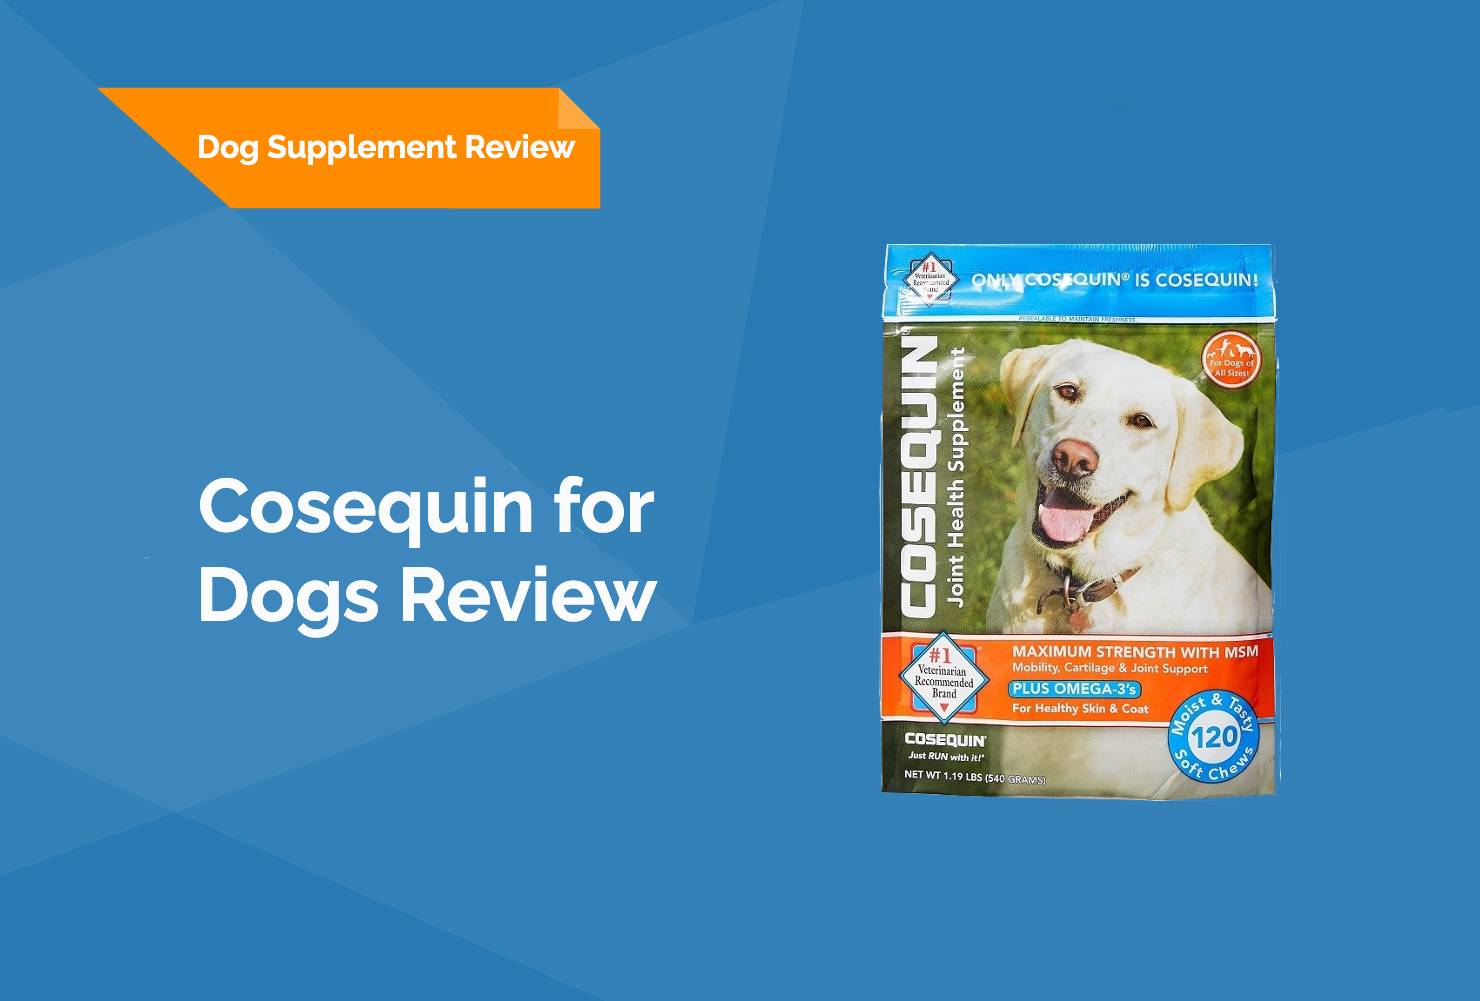 Cosequin for Dogs Review HEP Featured Image